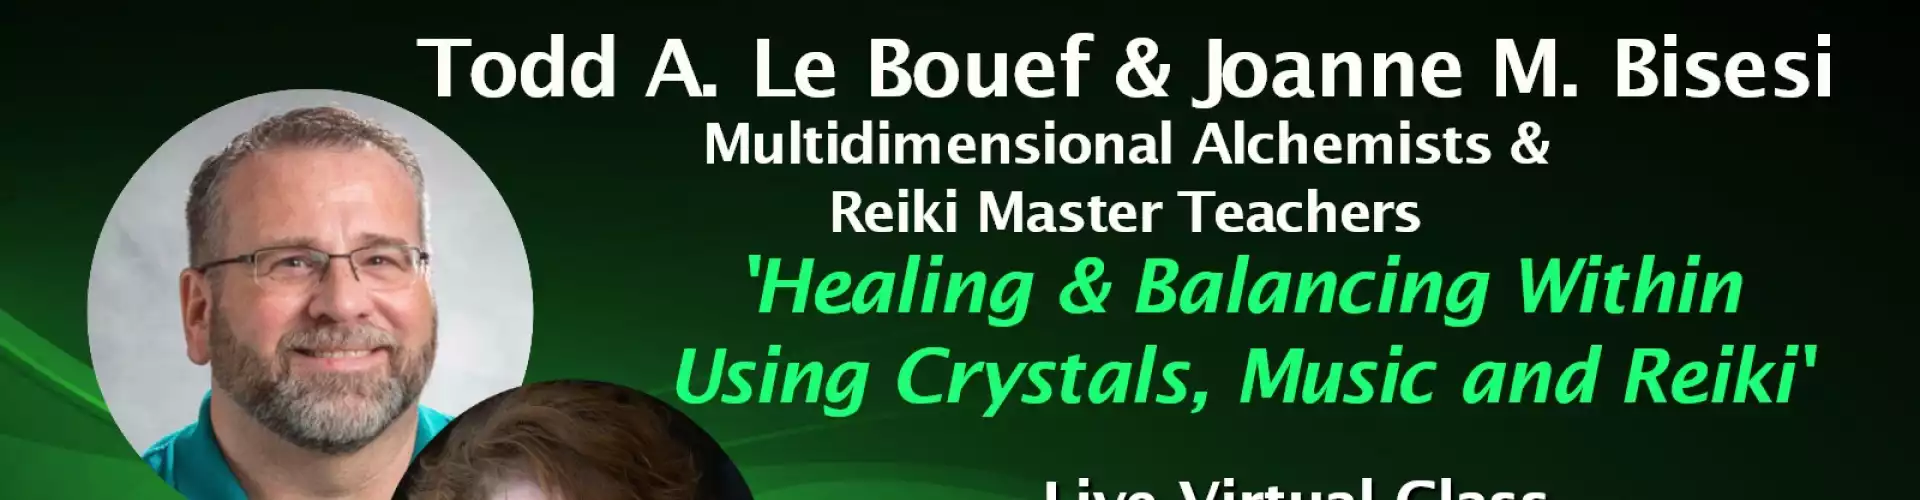 Healing & Balancing Within Using Crystals, Music & Reiki w/ WU Experts Todd & Joanne